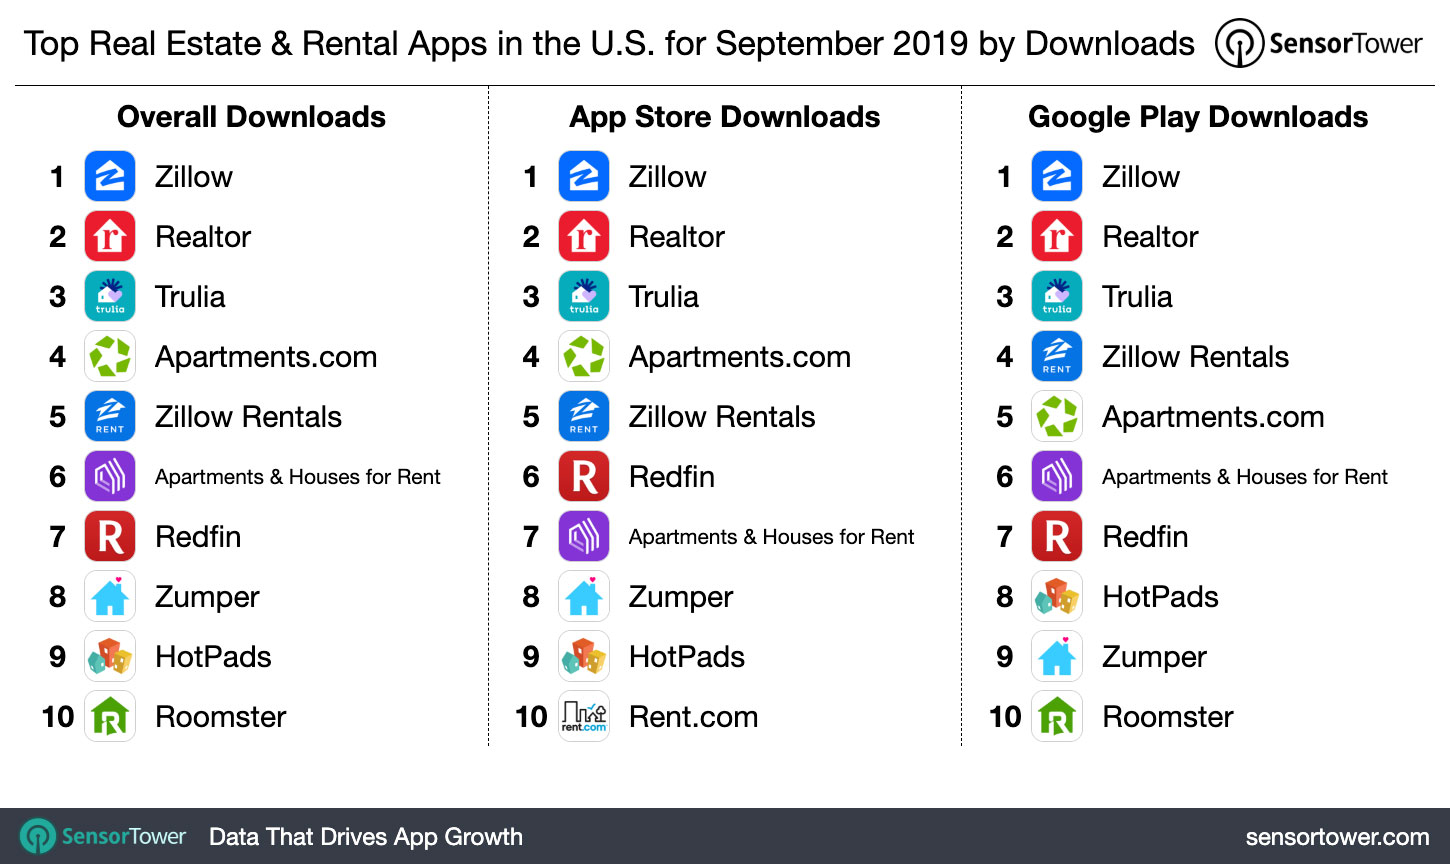 Top Real Estate & Rental Apps in the U.S. for September 2019 by Downloads